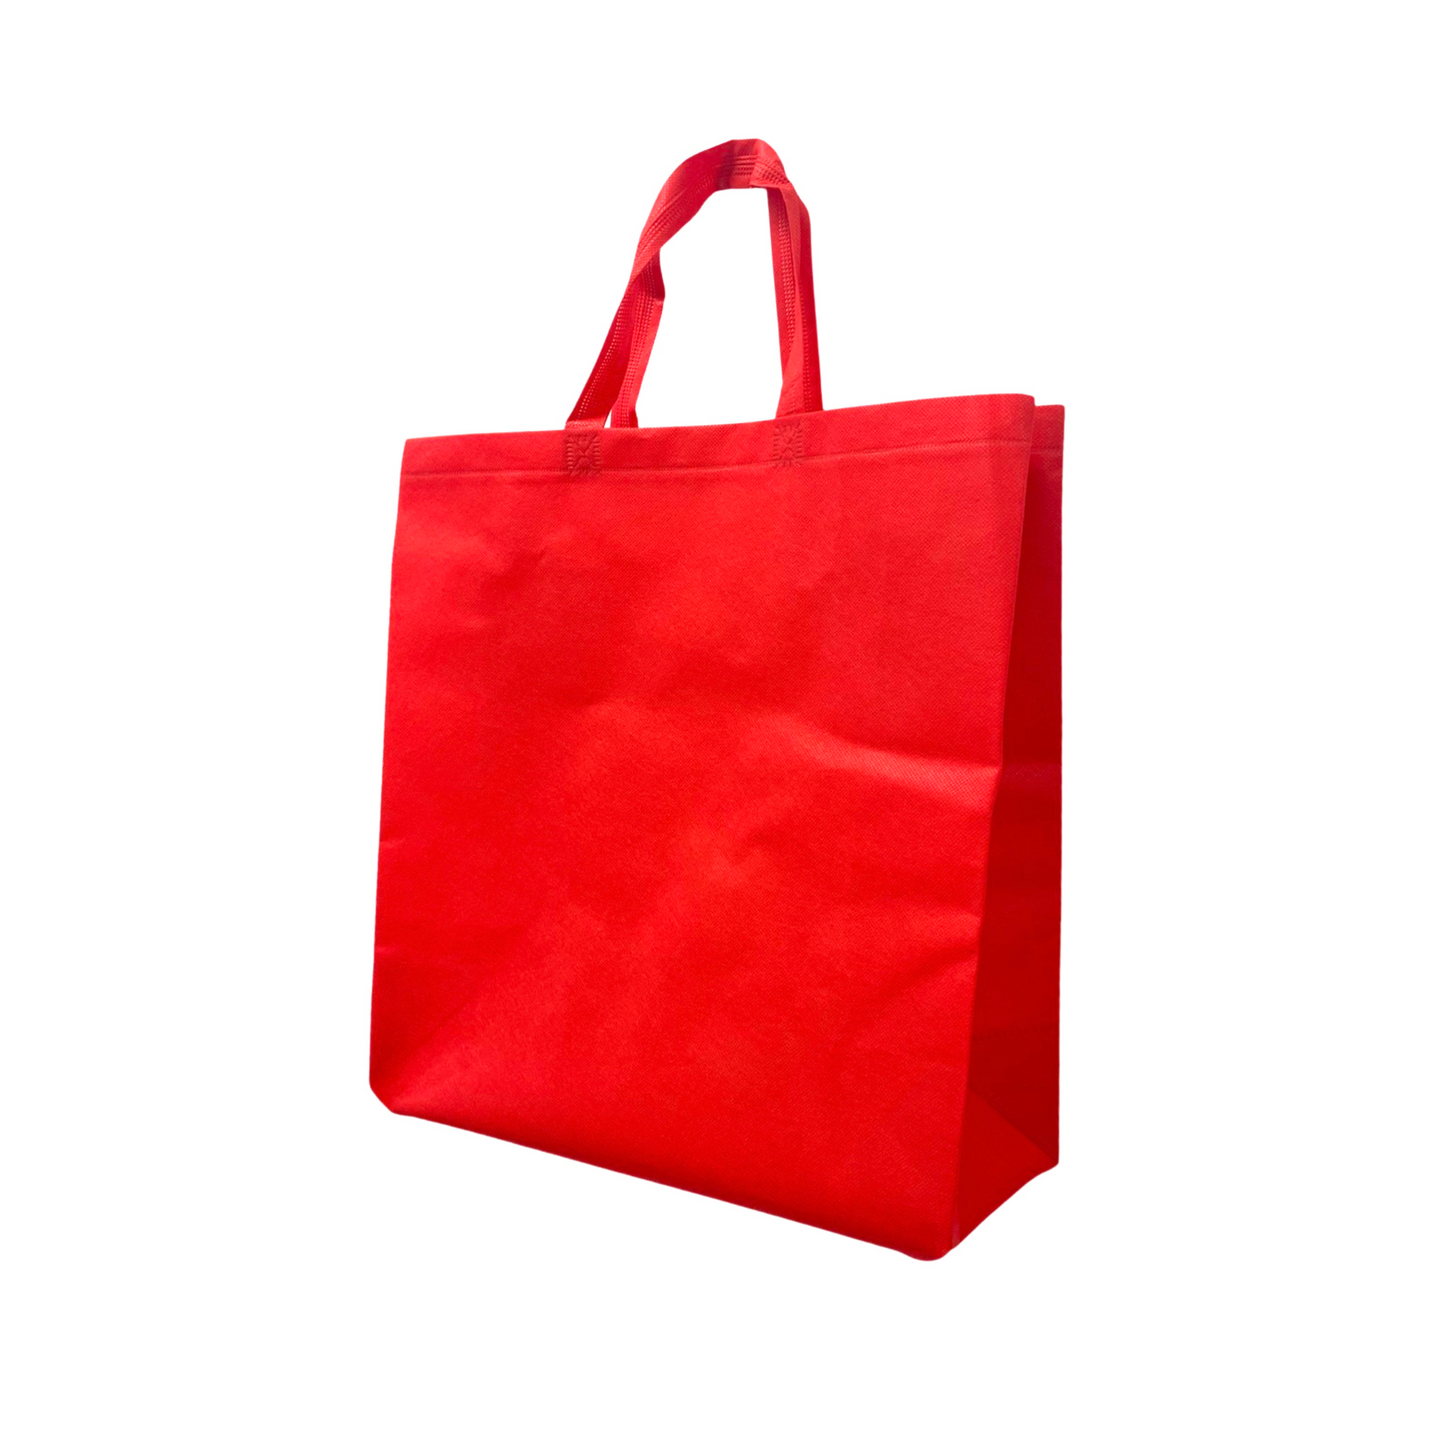 200pcs, Grocer, 15.5x6x15.5 inches, Red Non-Woven Reusable Shopping Bags, with Flat Handles